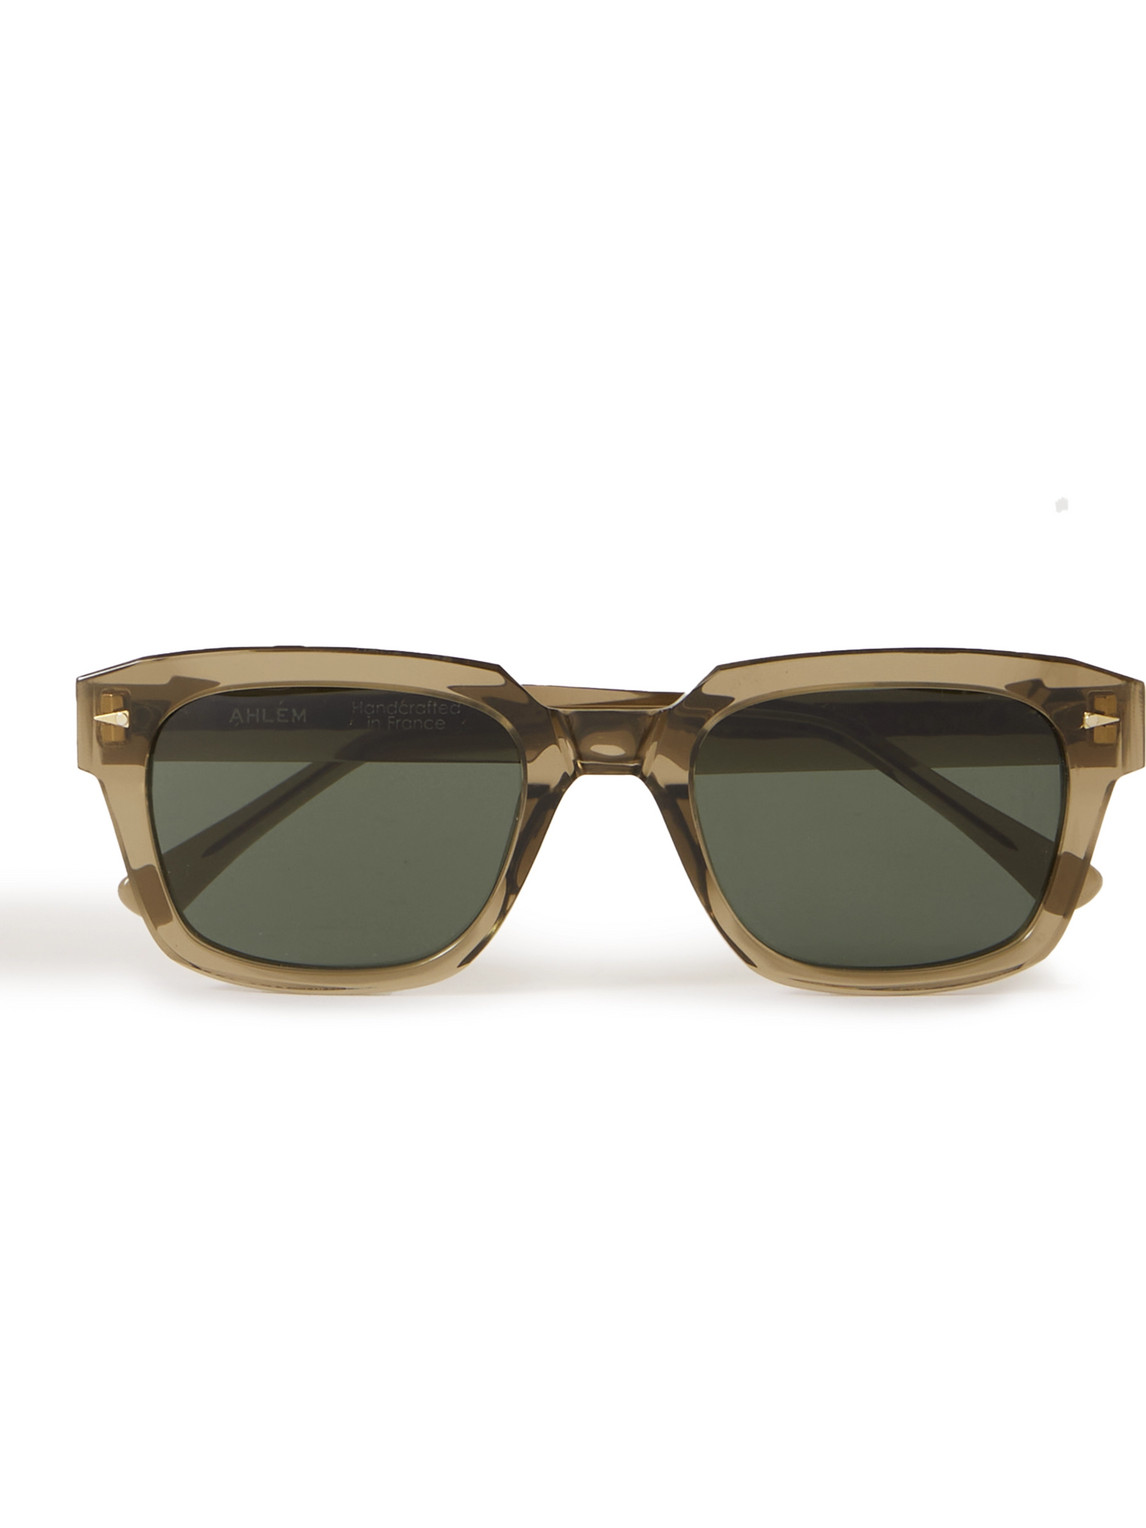 Ahlem Volontaires Square-frame Acetate Sunglasses In Neutrals